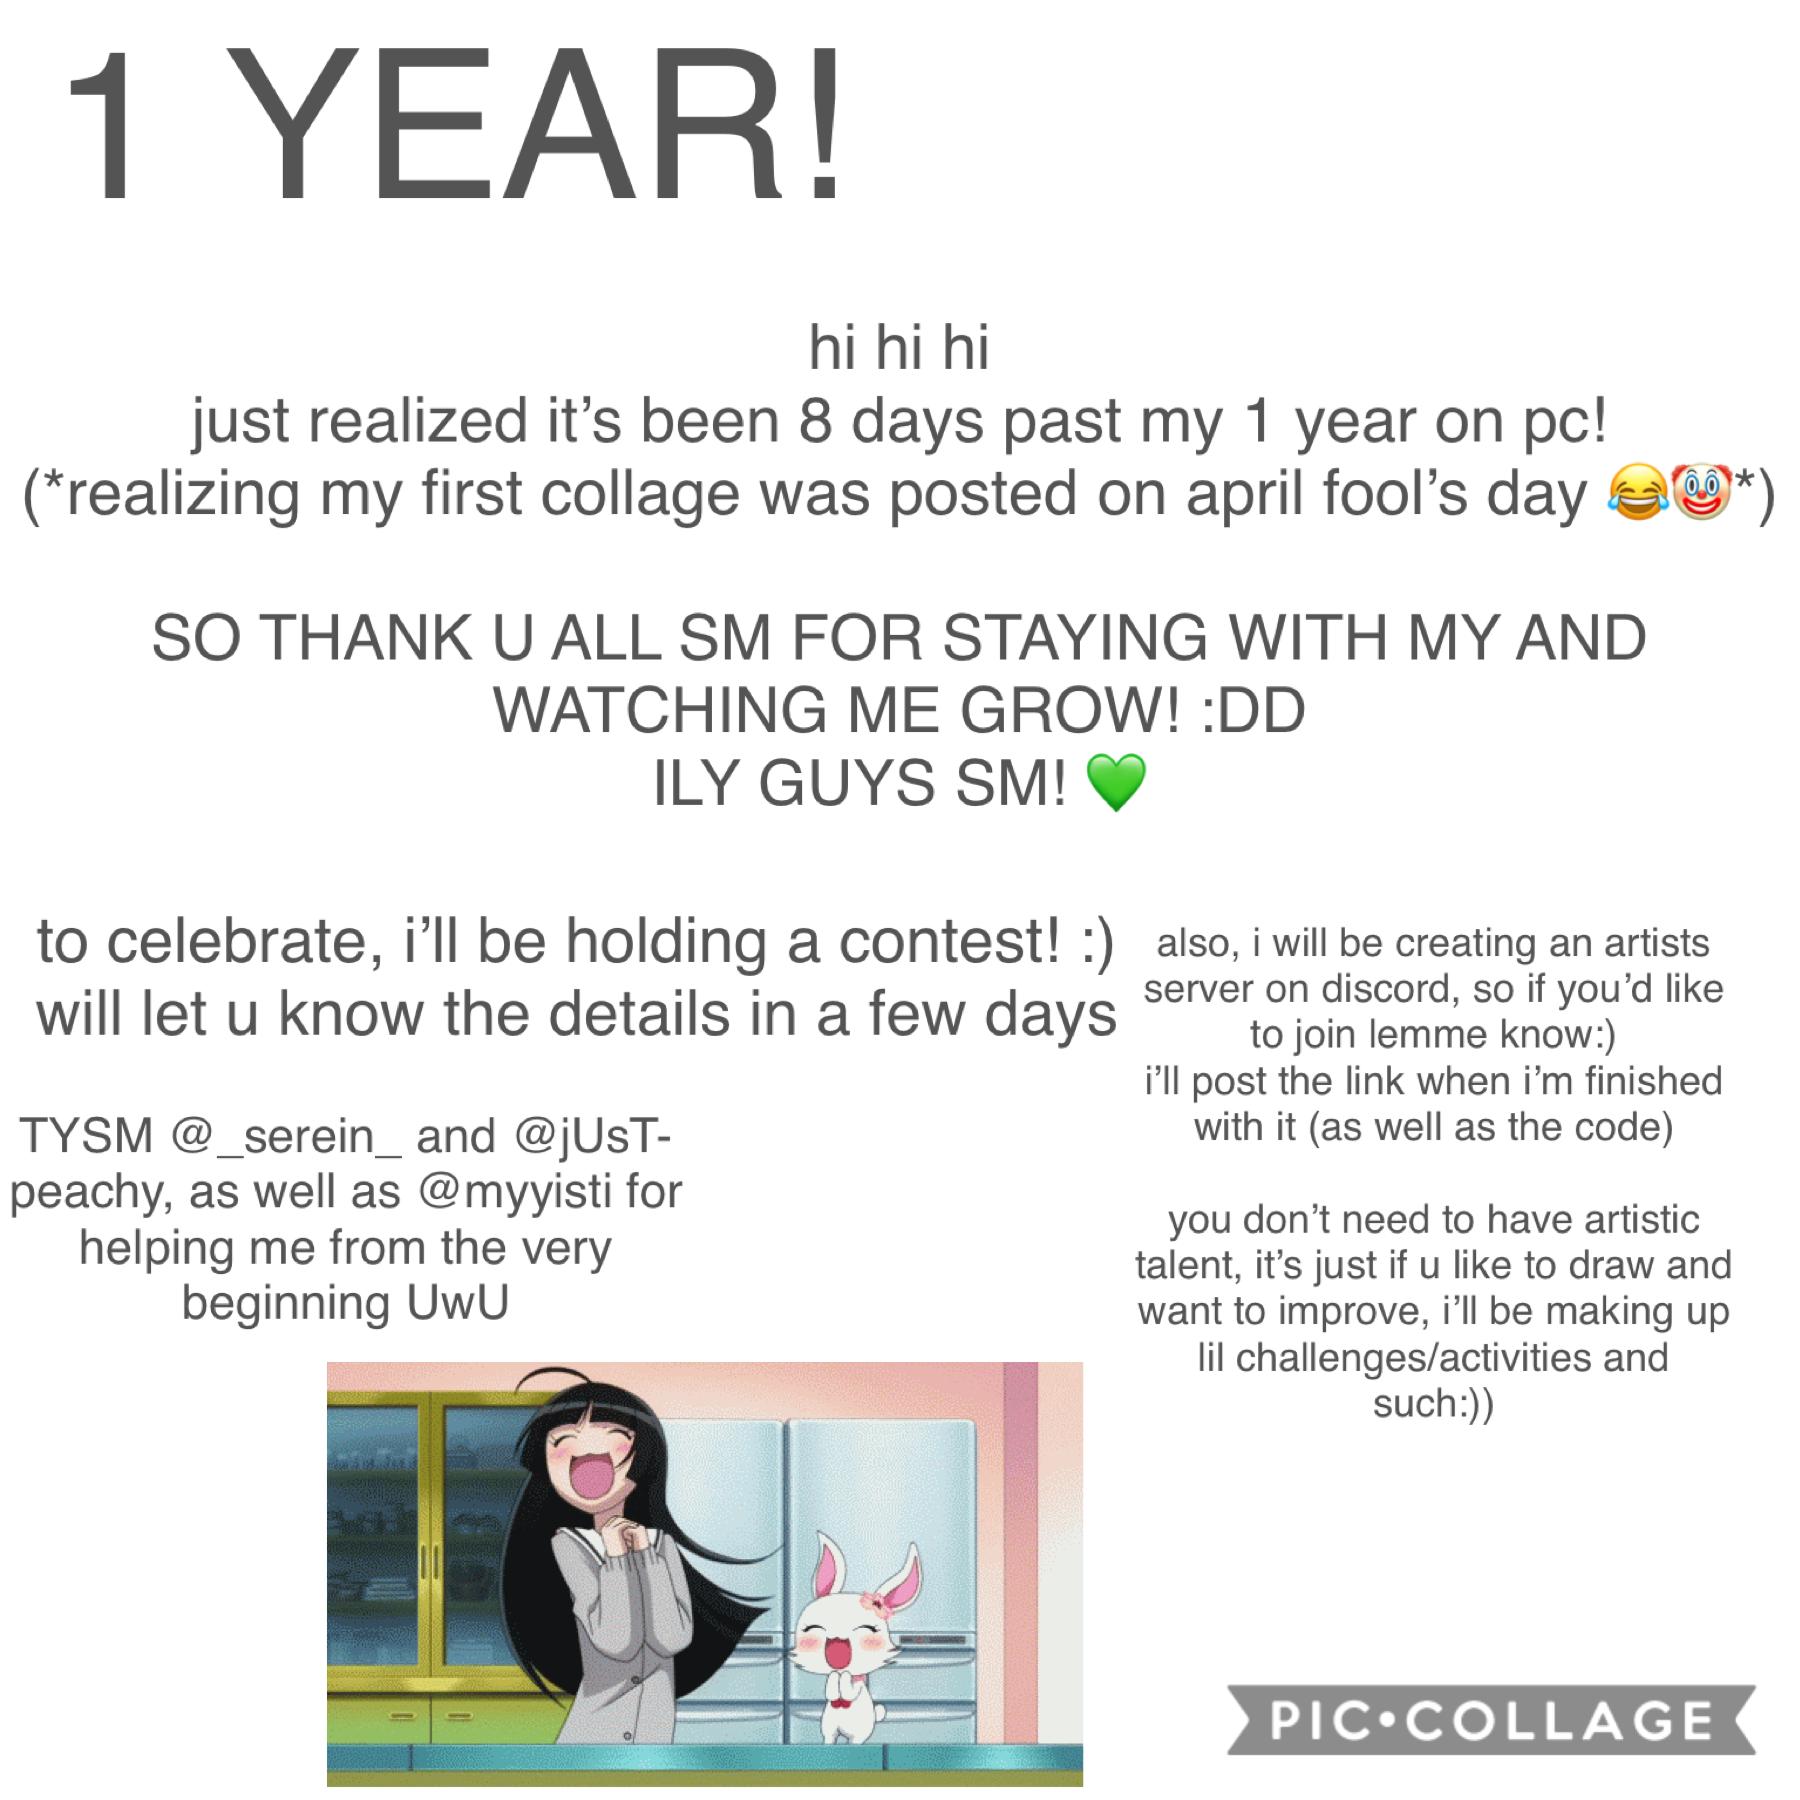 ONE YEAR ONE YEAR ONE YEAR! (tap)
TY ALL SM, I COULDN’T HAVE DONE IT WITHOUT YALL🥺💚 
looking forward to creating more collages and inspiring others! uwu
collab coming up soon ;)
🤠🤠🤠
